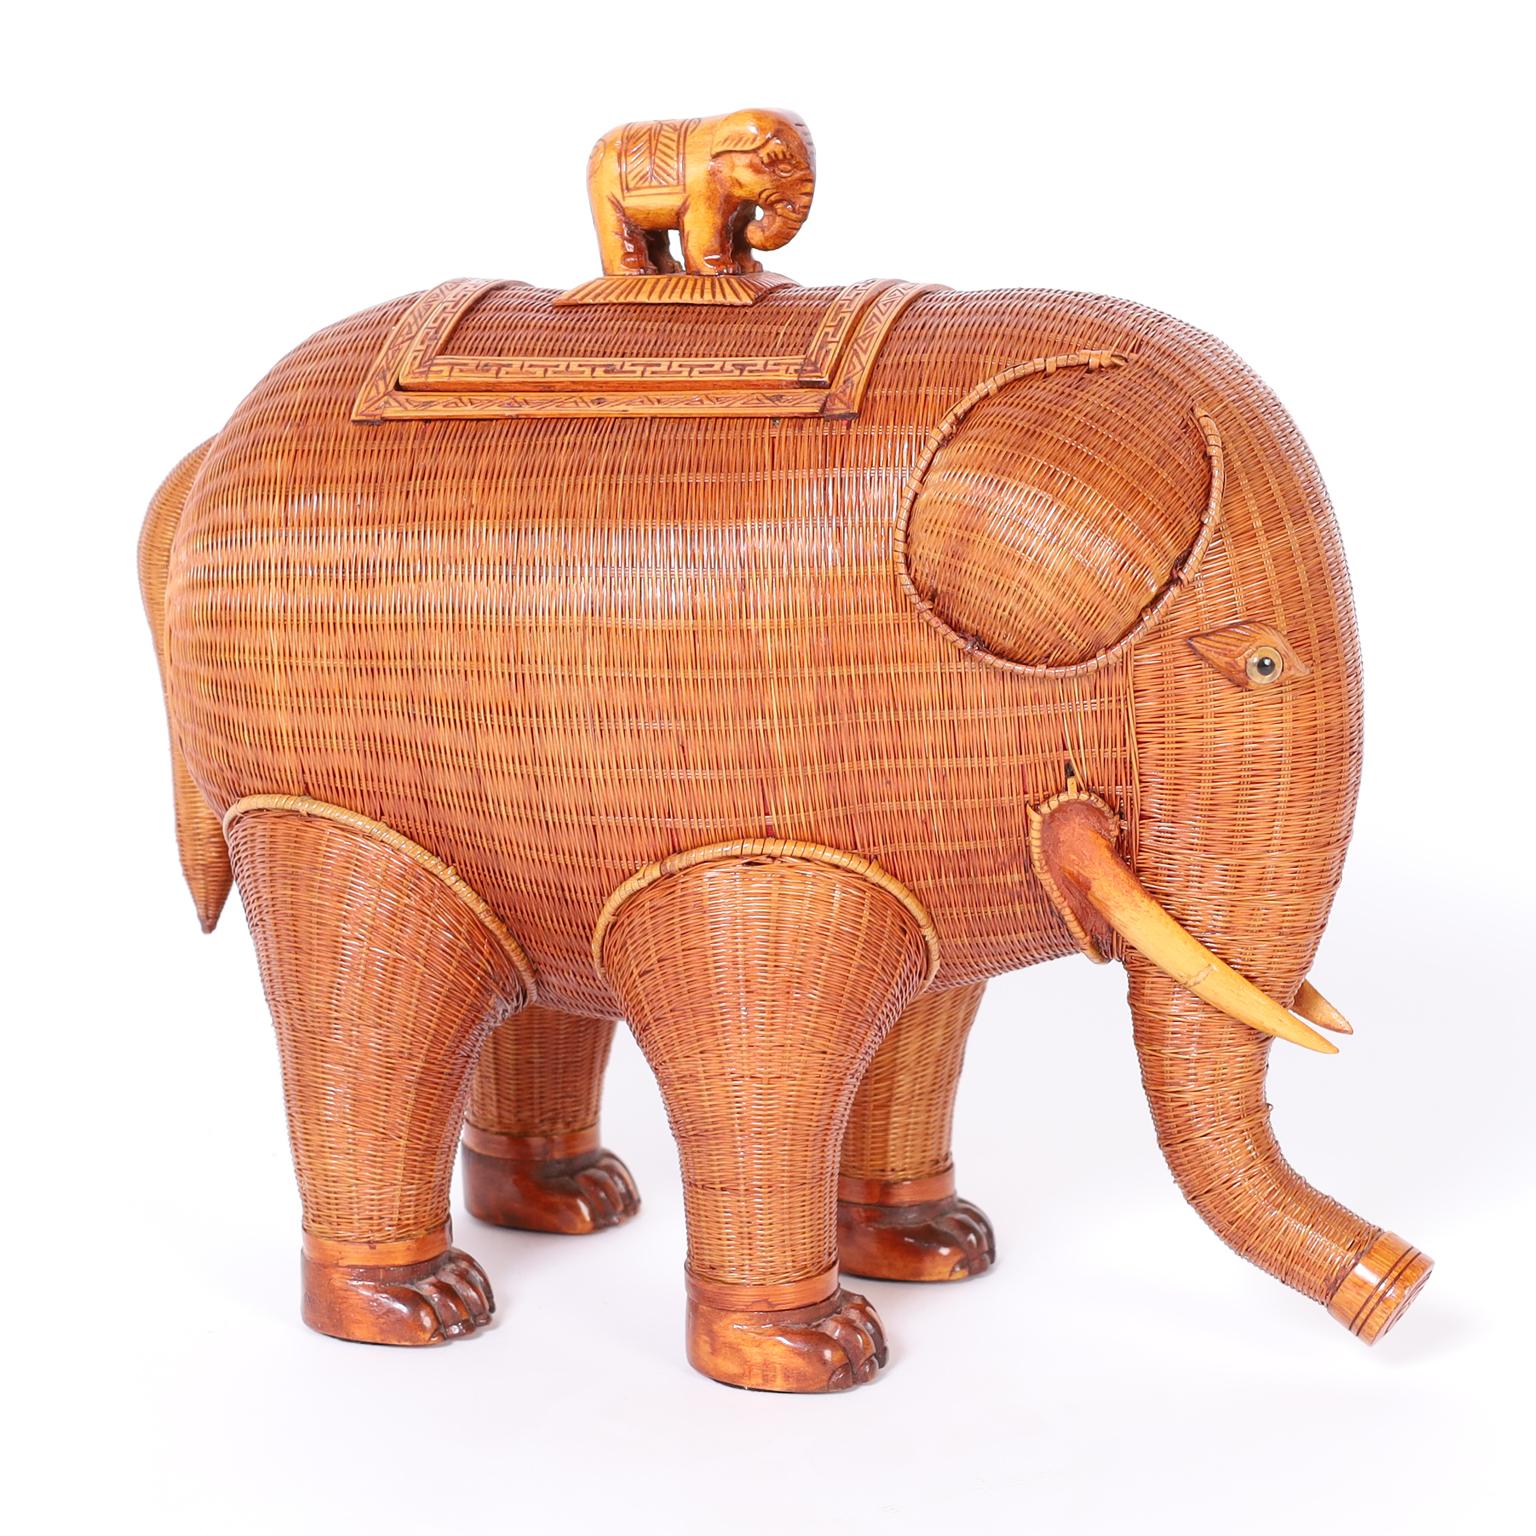 Chinese Export Wicker Elephant Box For Sale